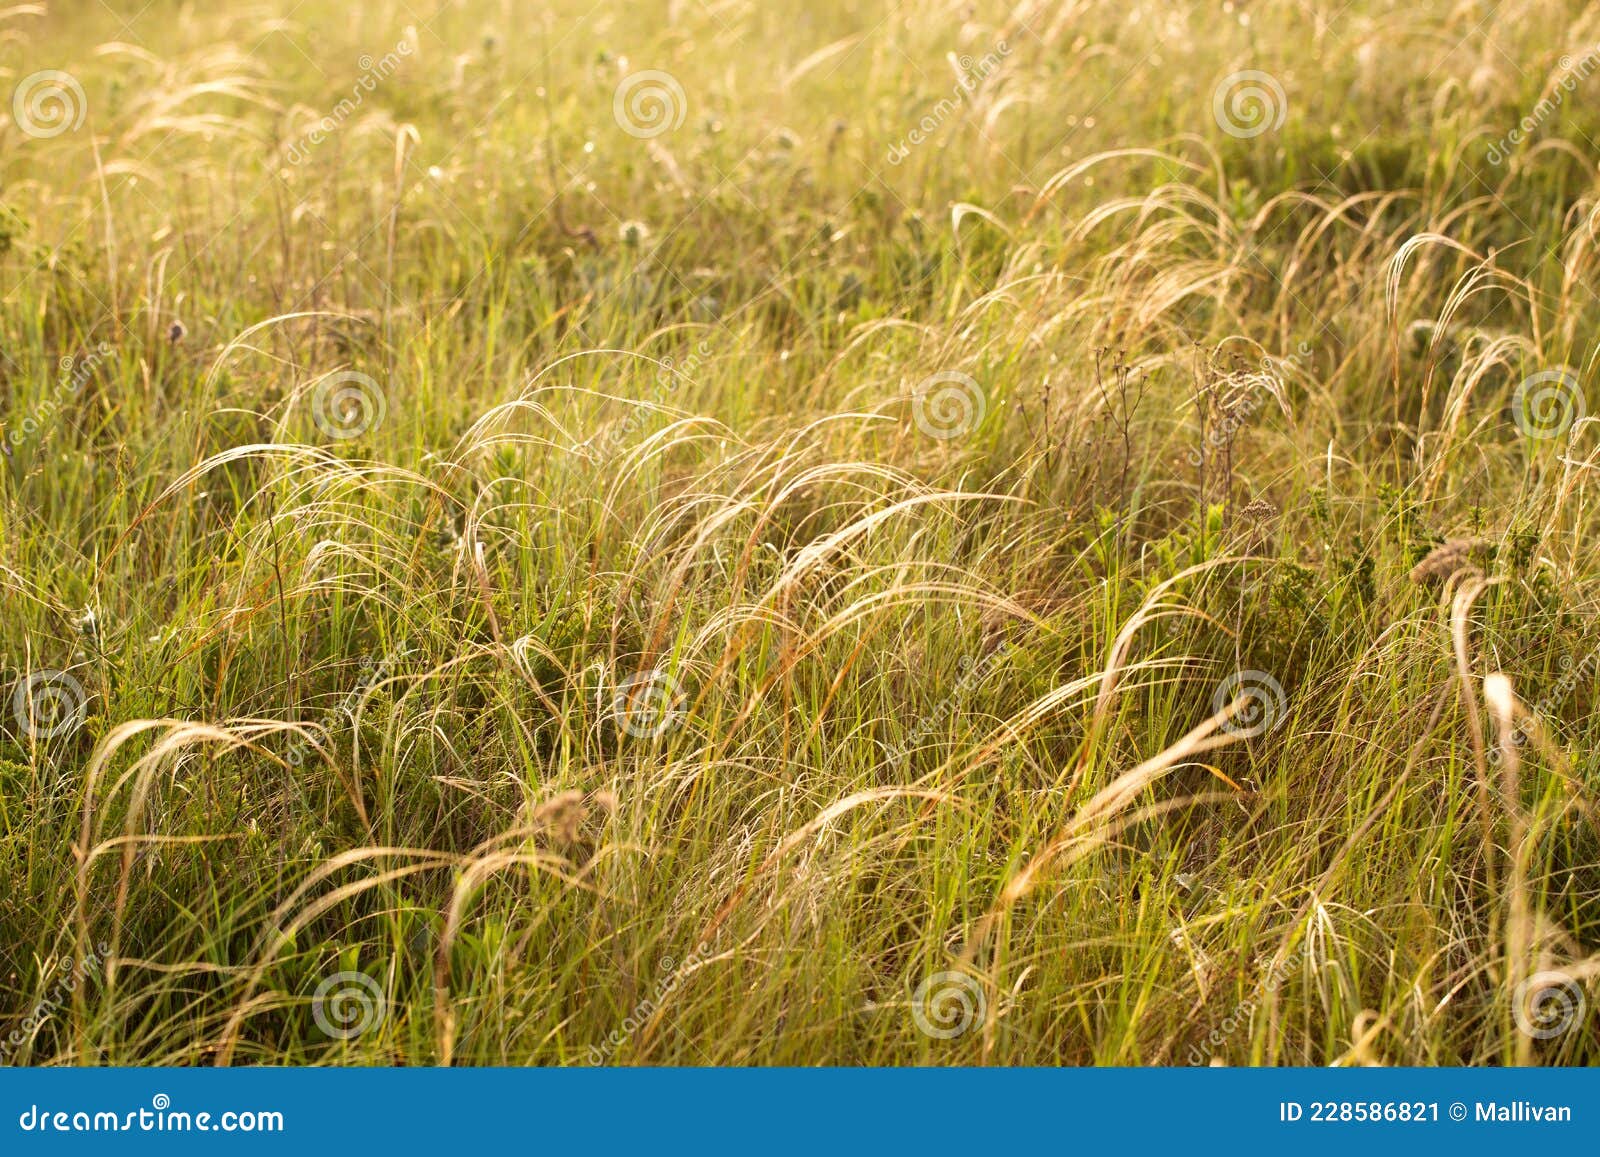 Lush Feather Grass in the Morning. Beautiful Grass Background Stock ...